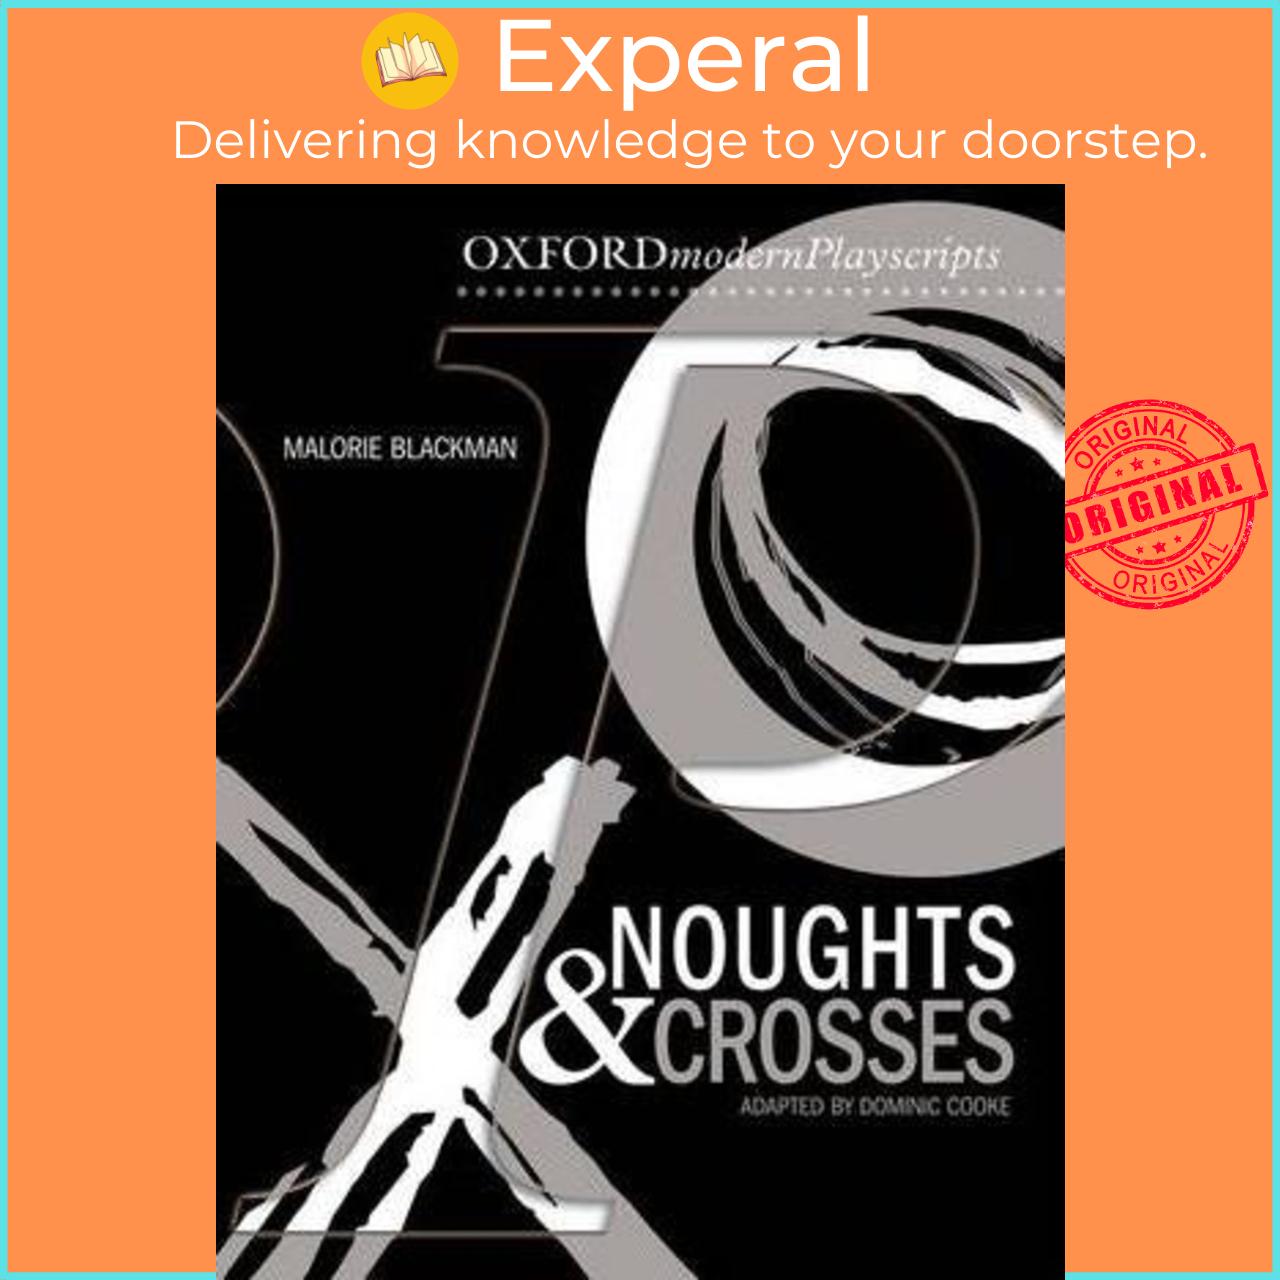 Sách - Noughts and Crosses by Dominic Cooke (UK edition, paperback)